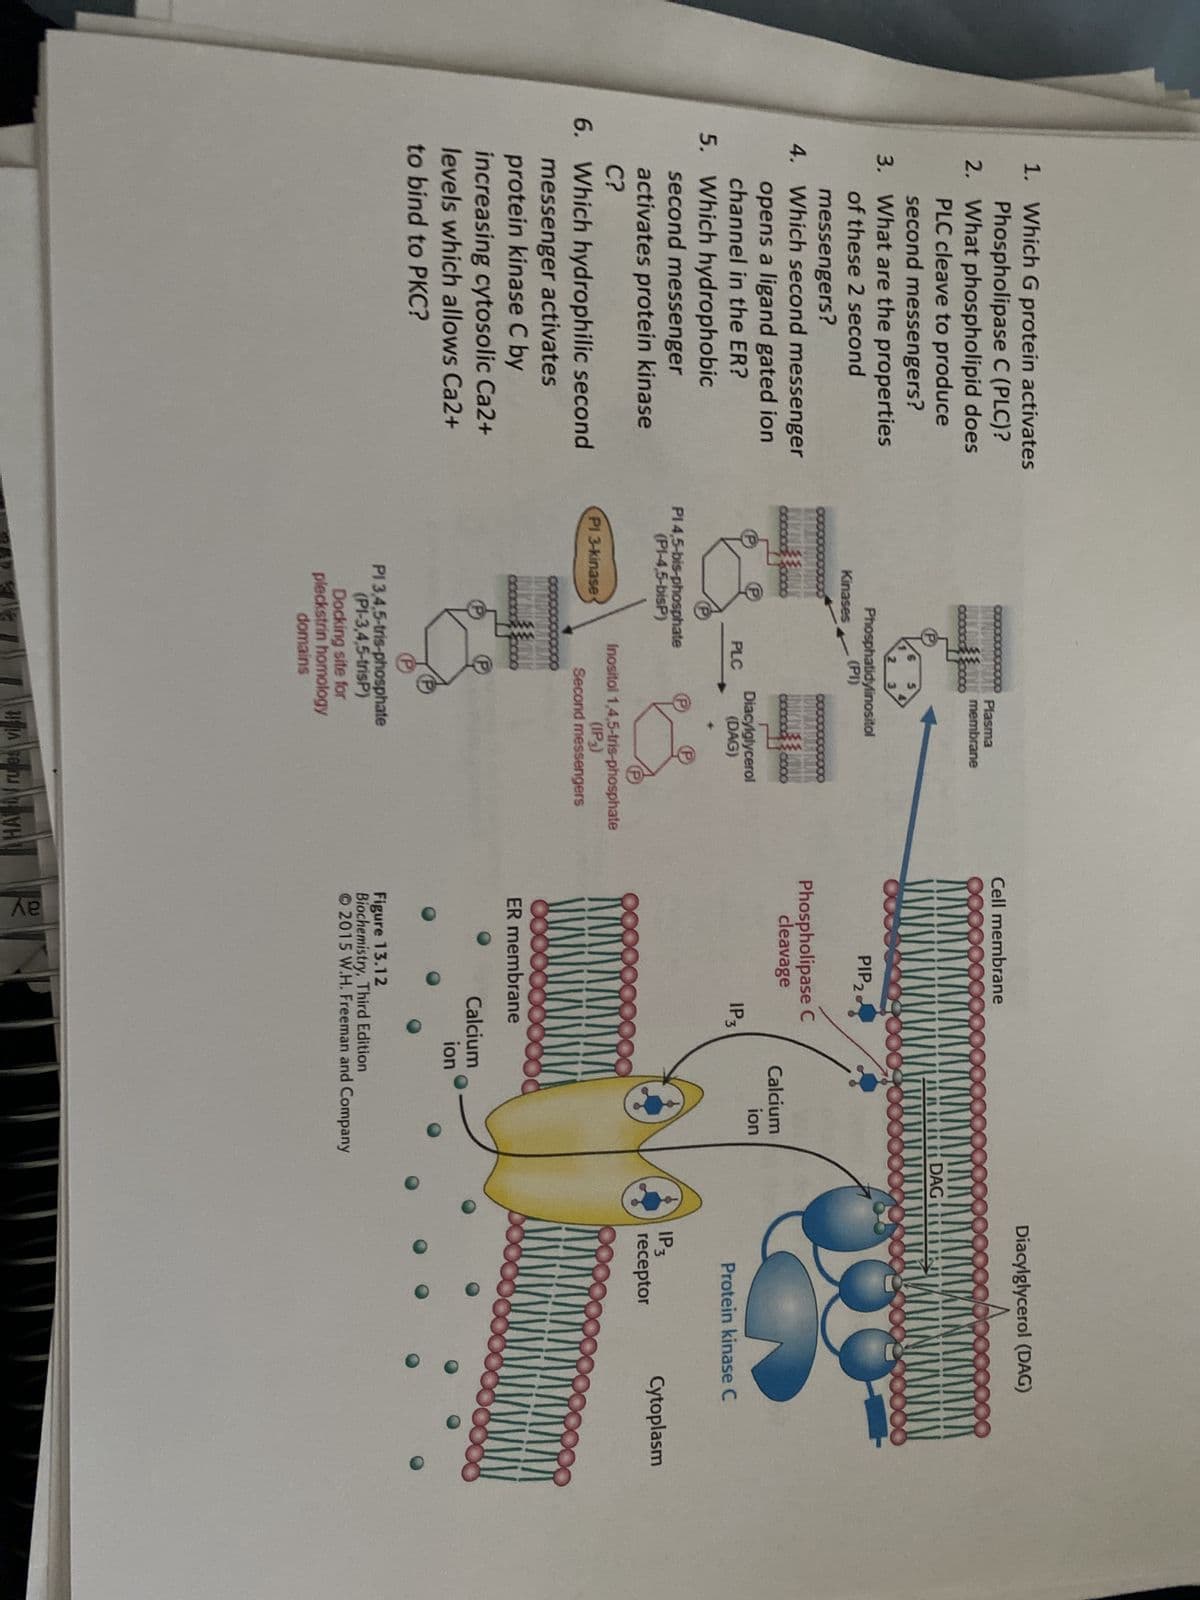 1. Which G protein activates
Phospholipase C (PLC)?
2. What phospholipid does
PLC cleave to produce
second messengers?
3. What are the properties
of these 2 second
messengers?
4. Which second messenger
opens a ligand gated ion
channel in the ER?
5. Which hydrophobic
second messenger
activates protein kinase
C?
6. Which hydrophilic second
messenger activates
protein kinase C by
increasing cytosolic Ca2+
levels which allows Ca2+
to bind to PKC?
Kinases
PI 3-kinase
2
Phosphatidylinositol
(PI)
PI 4,5-bis-phosphate
(PI-4,5-bisP)
PLC
Plasma
membrane
domains
0000
Diacylglycerol
(DAG)
Inositol 1,4,5-tris-phosphate
(IP₂)
Second messengers
PI 3,4,5-tris-phosphate
(PI-3,4,5-trisP)
Docking site for
pleckstrin homology
H
Cell membrane
PIP 2
Phospholipase C
cleavage
IP 3
ER membrane
ay
Calcium
ion
Calcium
ion
Figure 13.12
Biochemistry, Third Edition
2015 W.H. Freeman and Company
Diacylglycerol (DAG)
DAGI
TAKMINMA
Protein kinase C
IP3
receptor
Cytoplasm
MINIM